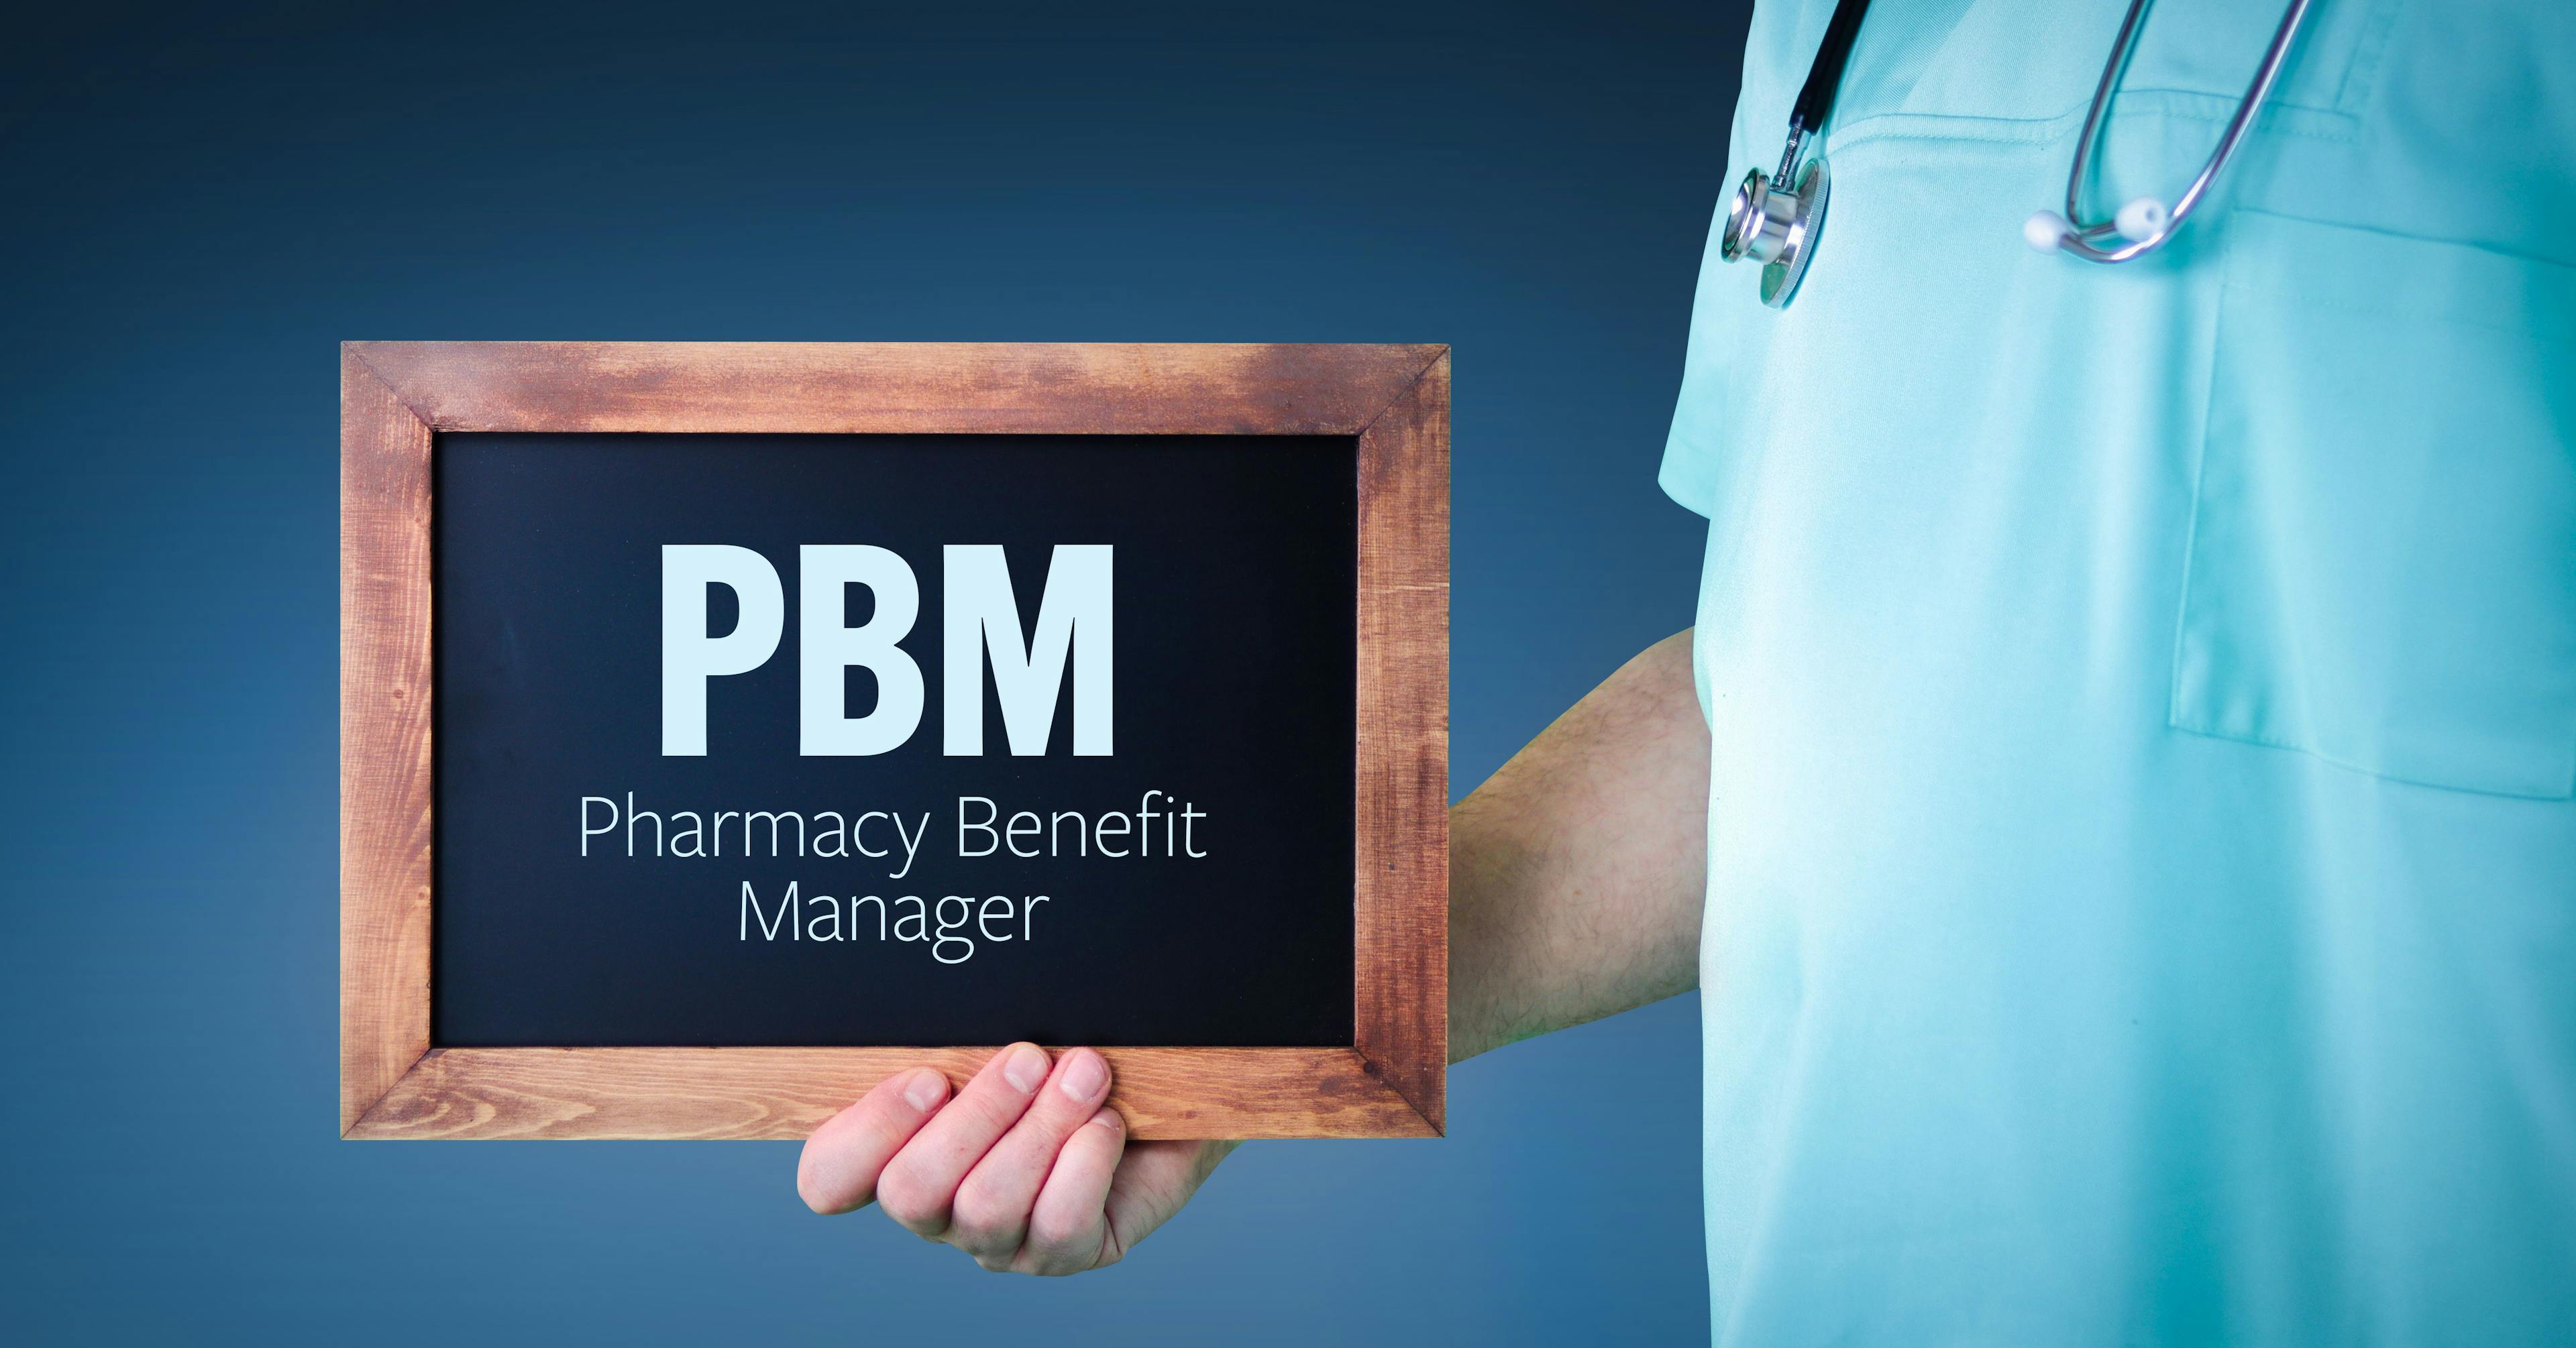 PBM practices are negatively impacting independent pharmacies across the United States. | image credit: MQ illustrations - stock.adobe.com